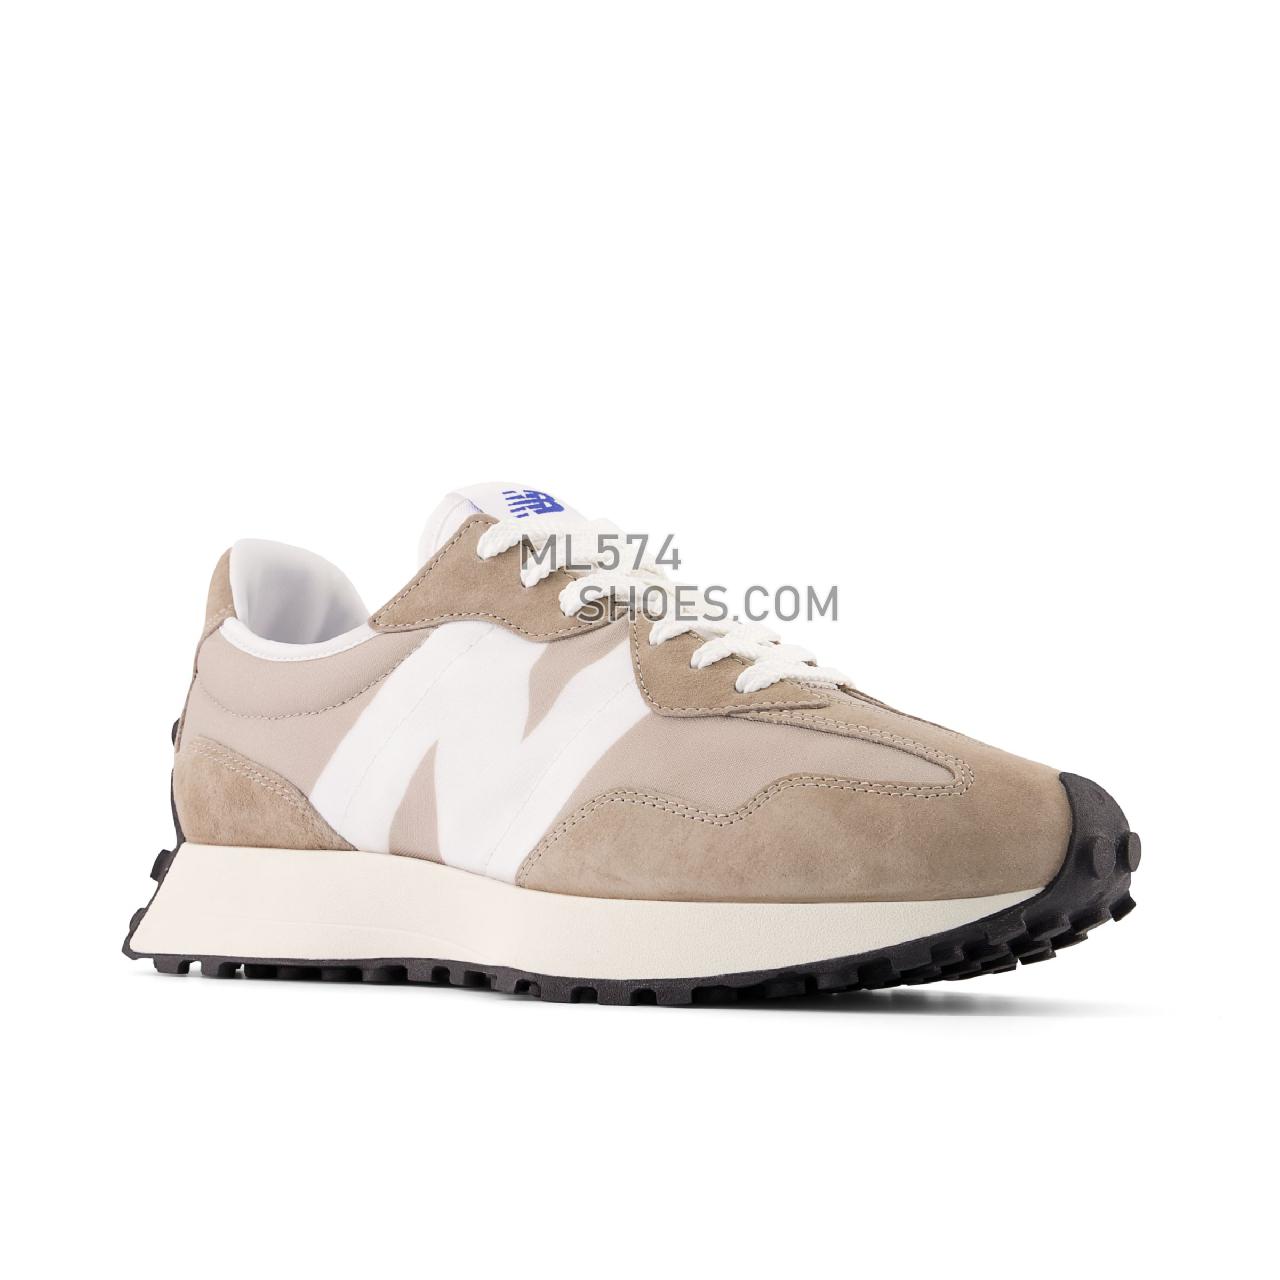 New Balance 327 - Men's Sport Style Sneakers - Mushroom with Aluminum - MS327LH1